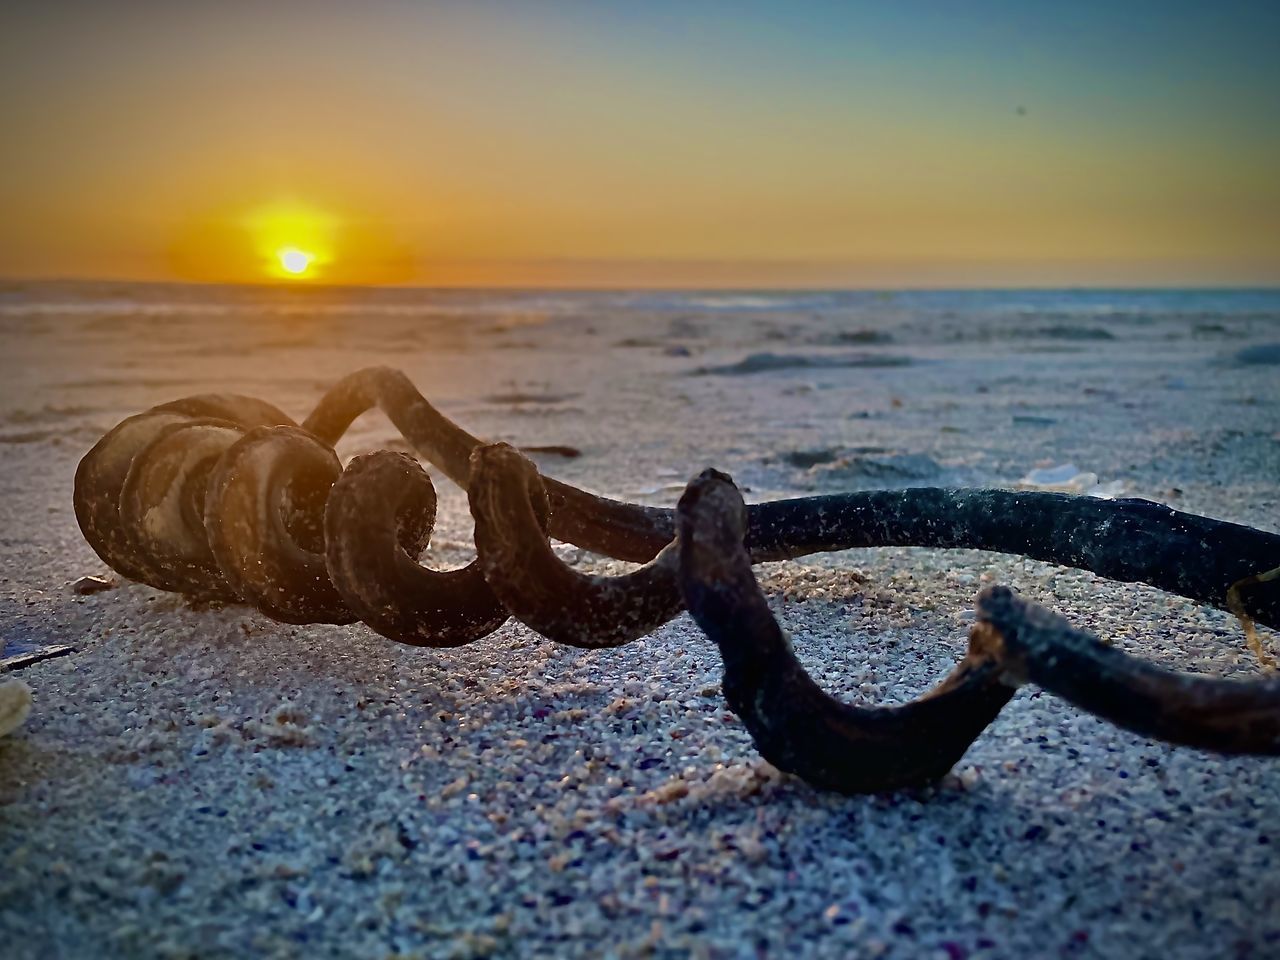 sunset, sea, sky, water, beach, land, wave, nature, ocean, horizon over water, horizon, sand, no people, beauty in nature, tranquility, scenics - nature, sunlight, tranquil scene, sun, outdoors, metal, shore, rusty, cloud, reflection, coast